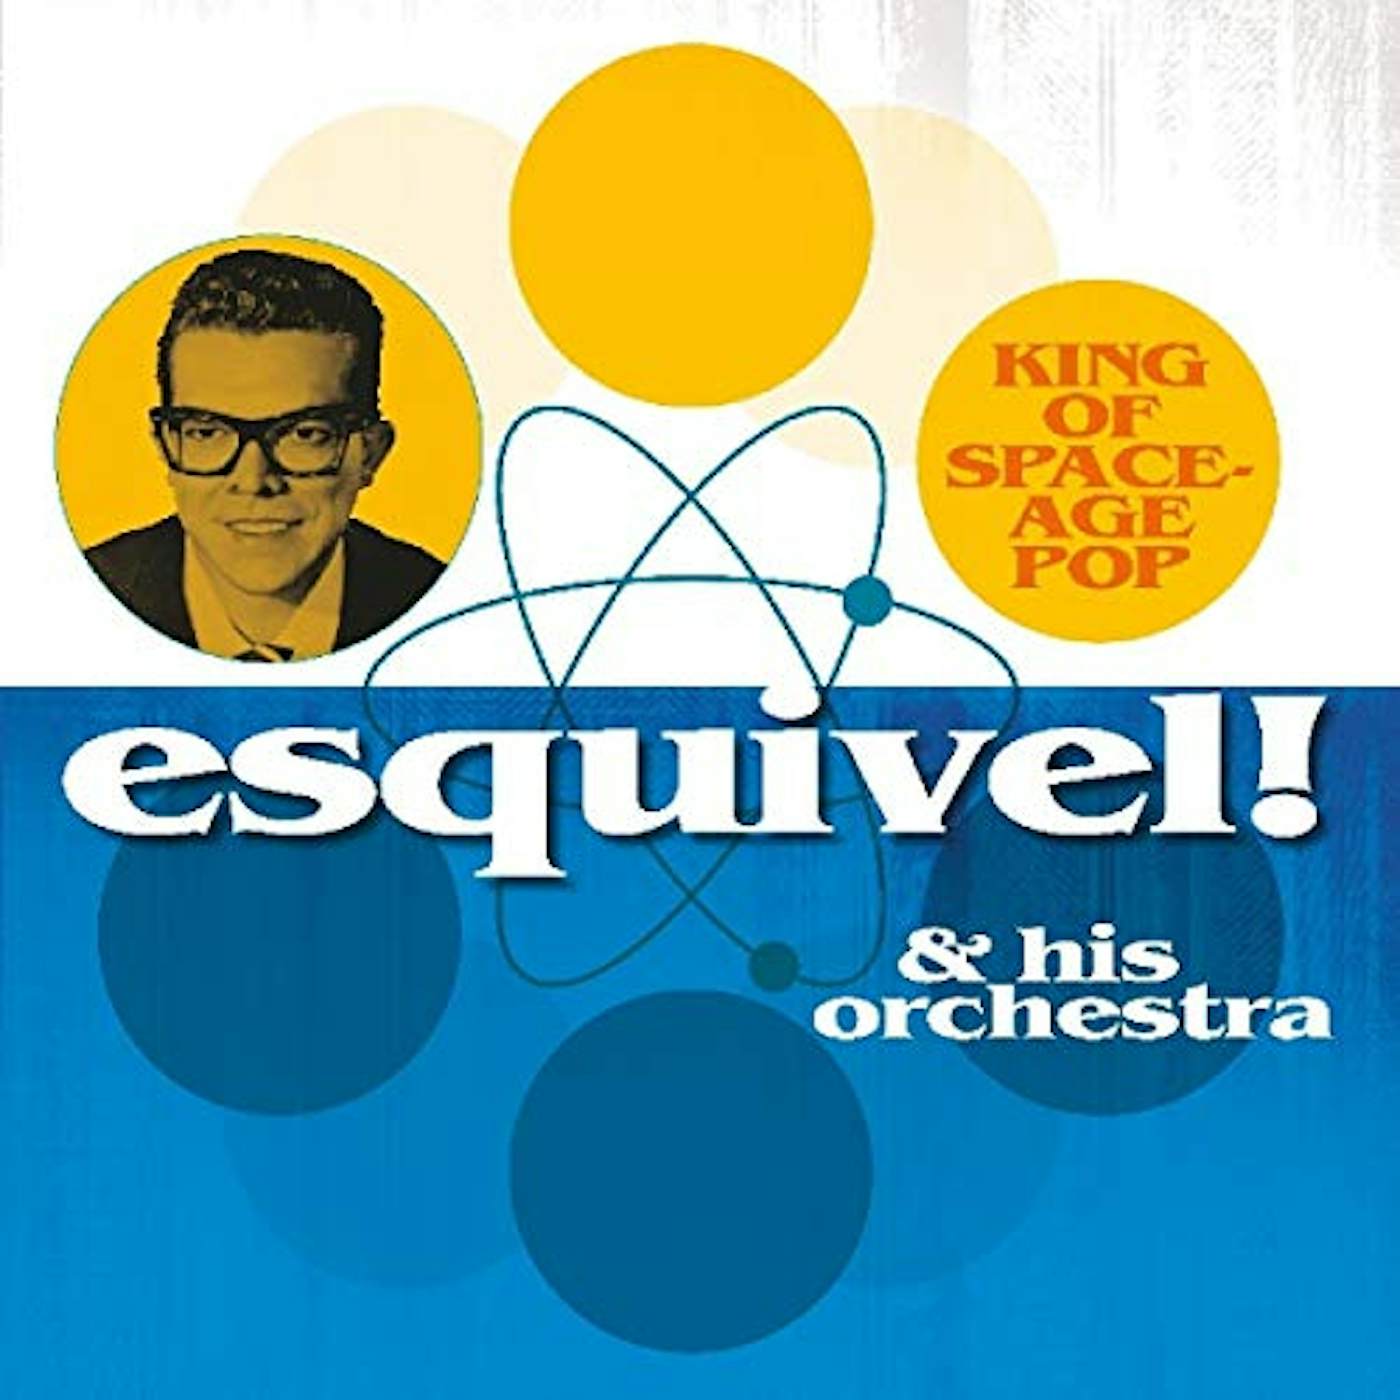 Esquivel & His Orchestra KING OF SPACE-AGE POP Vinyl Record